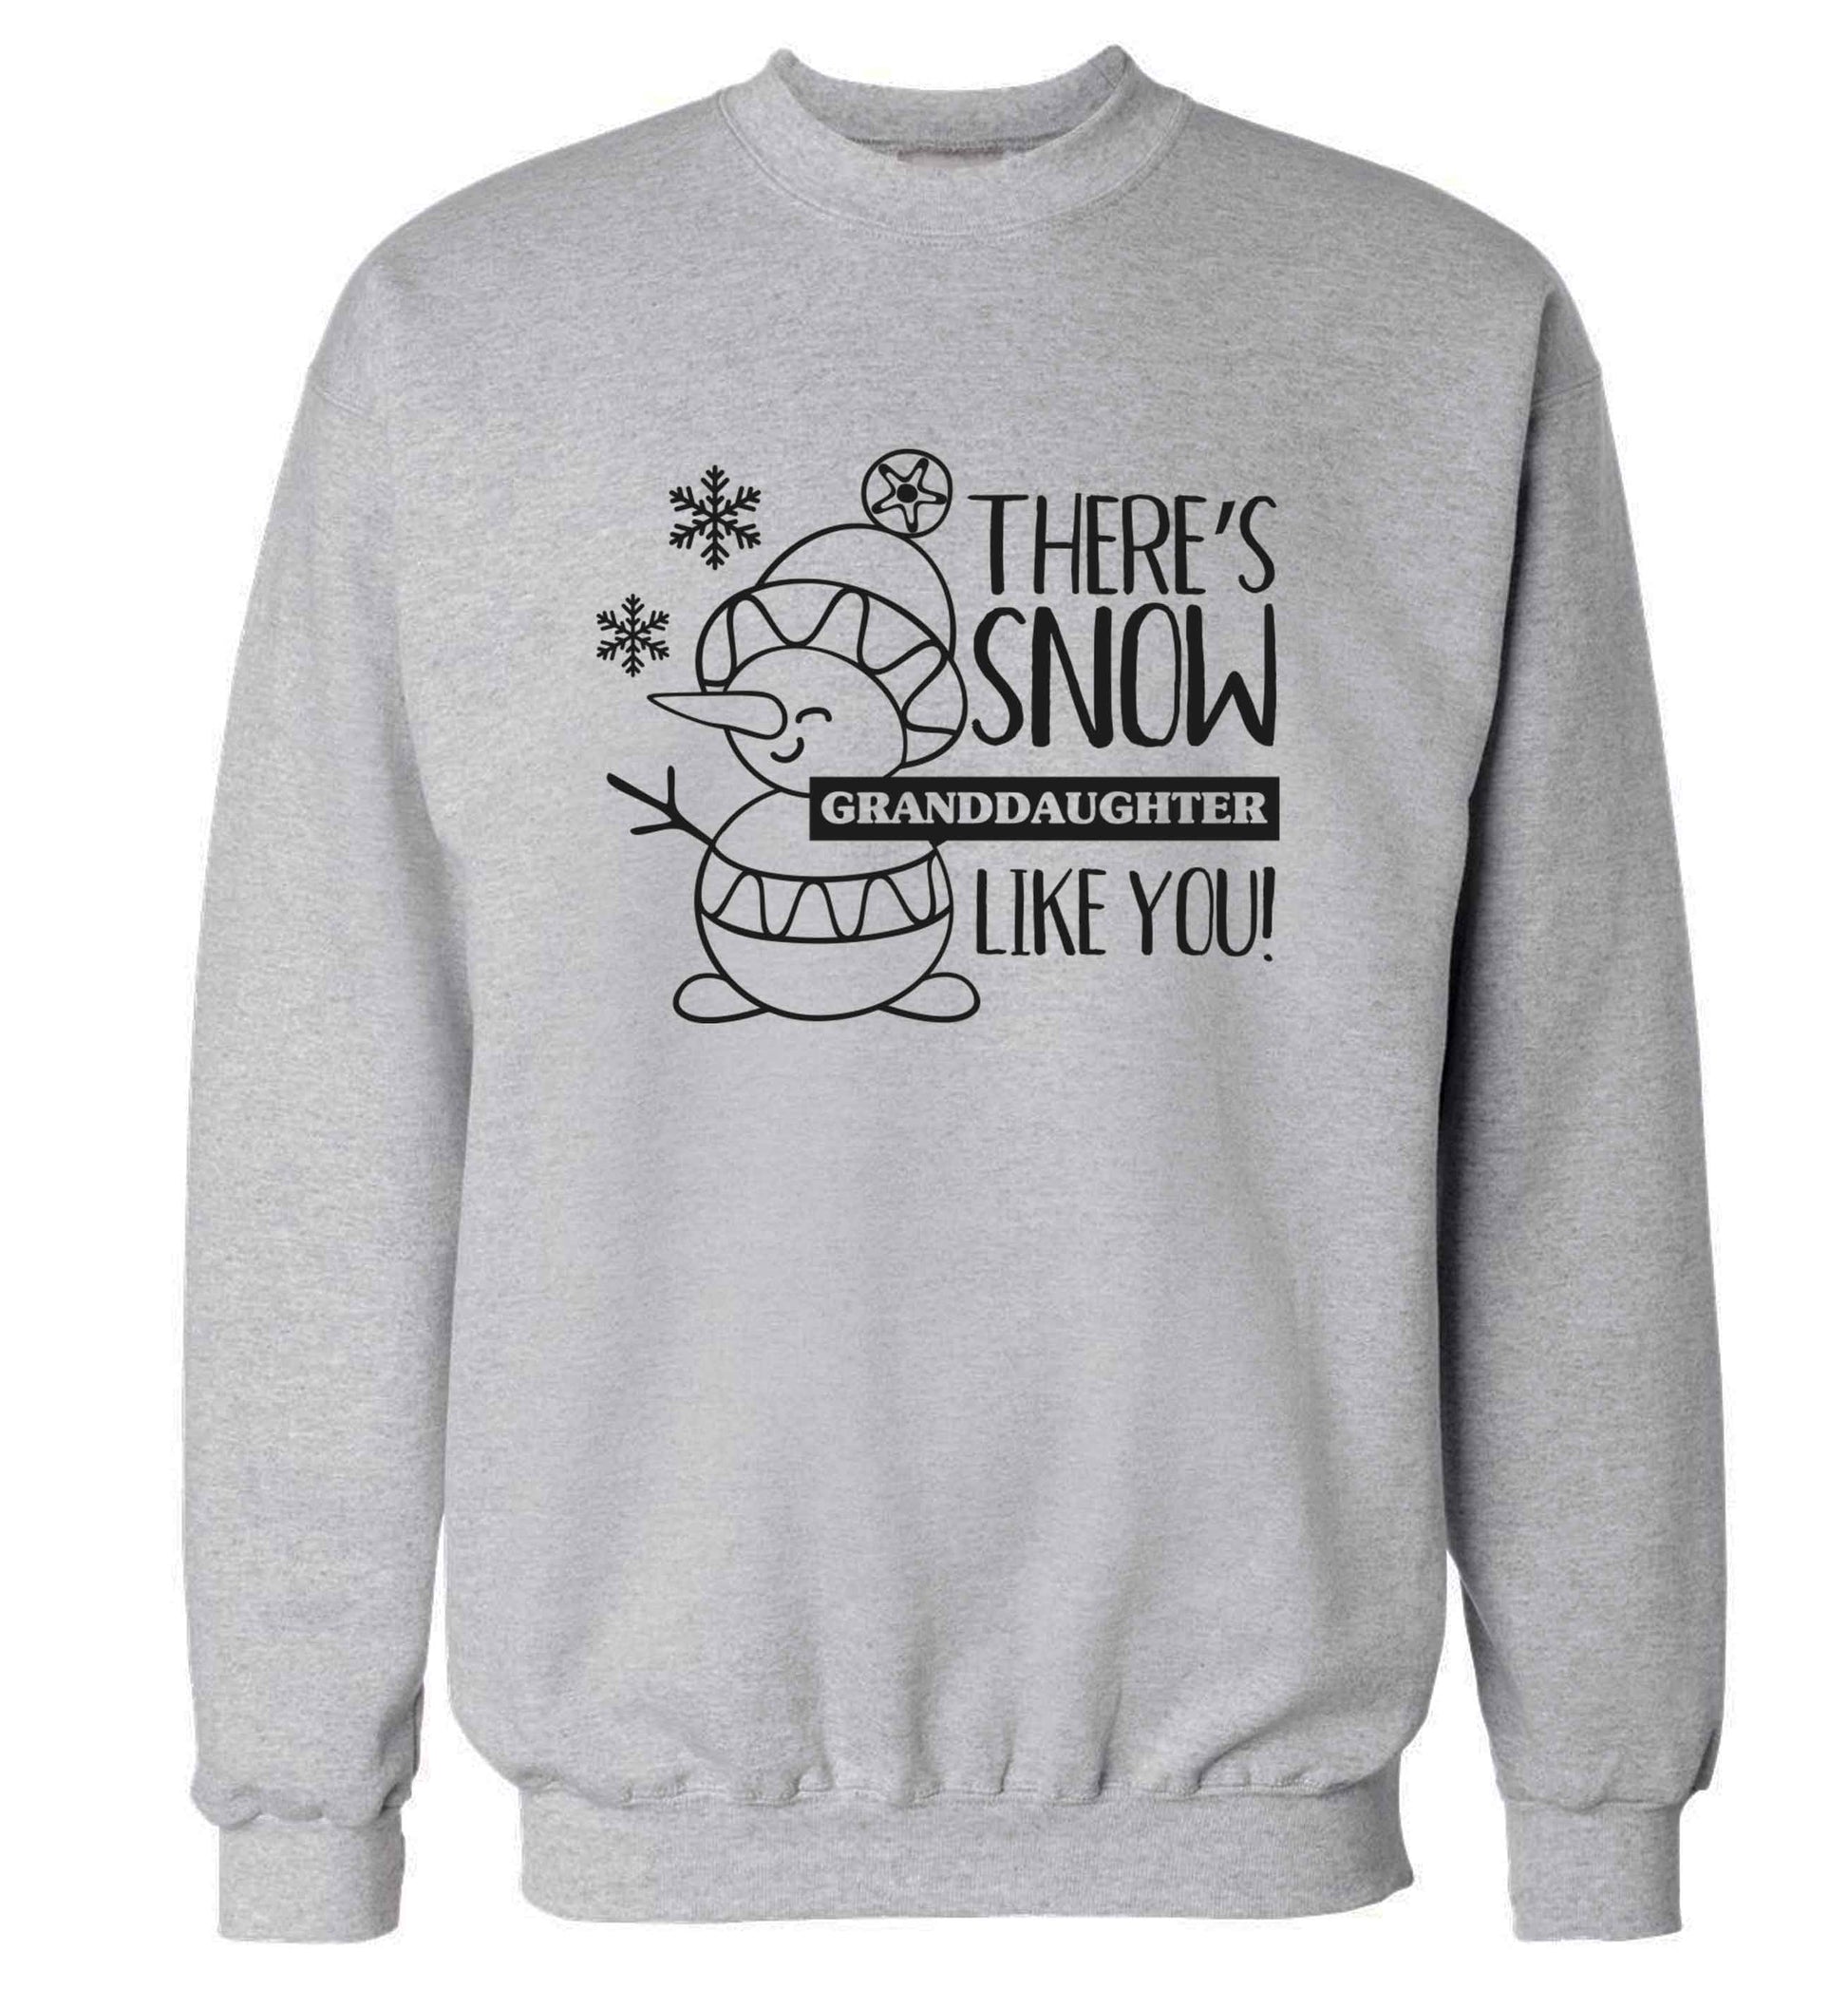 There's snow granddaughter like you adult's unisex grey sweater 2XL